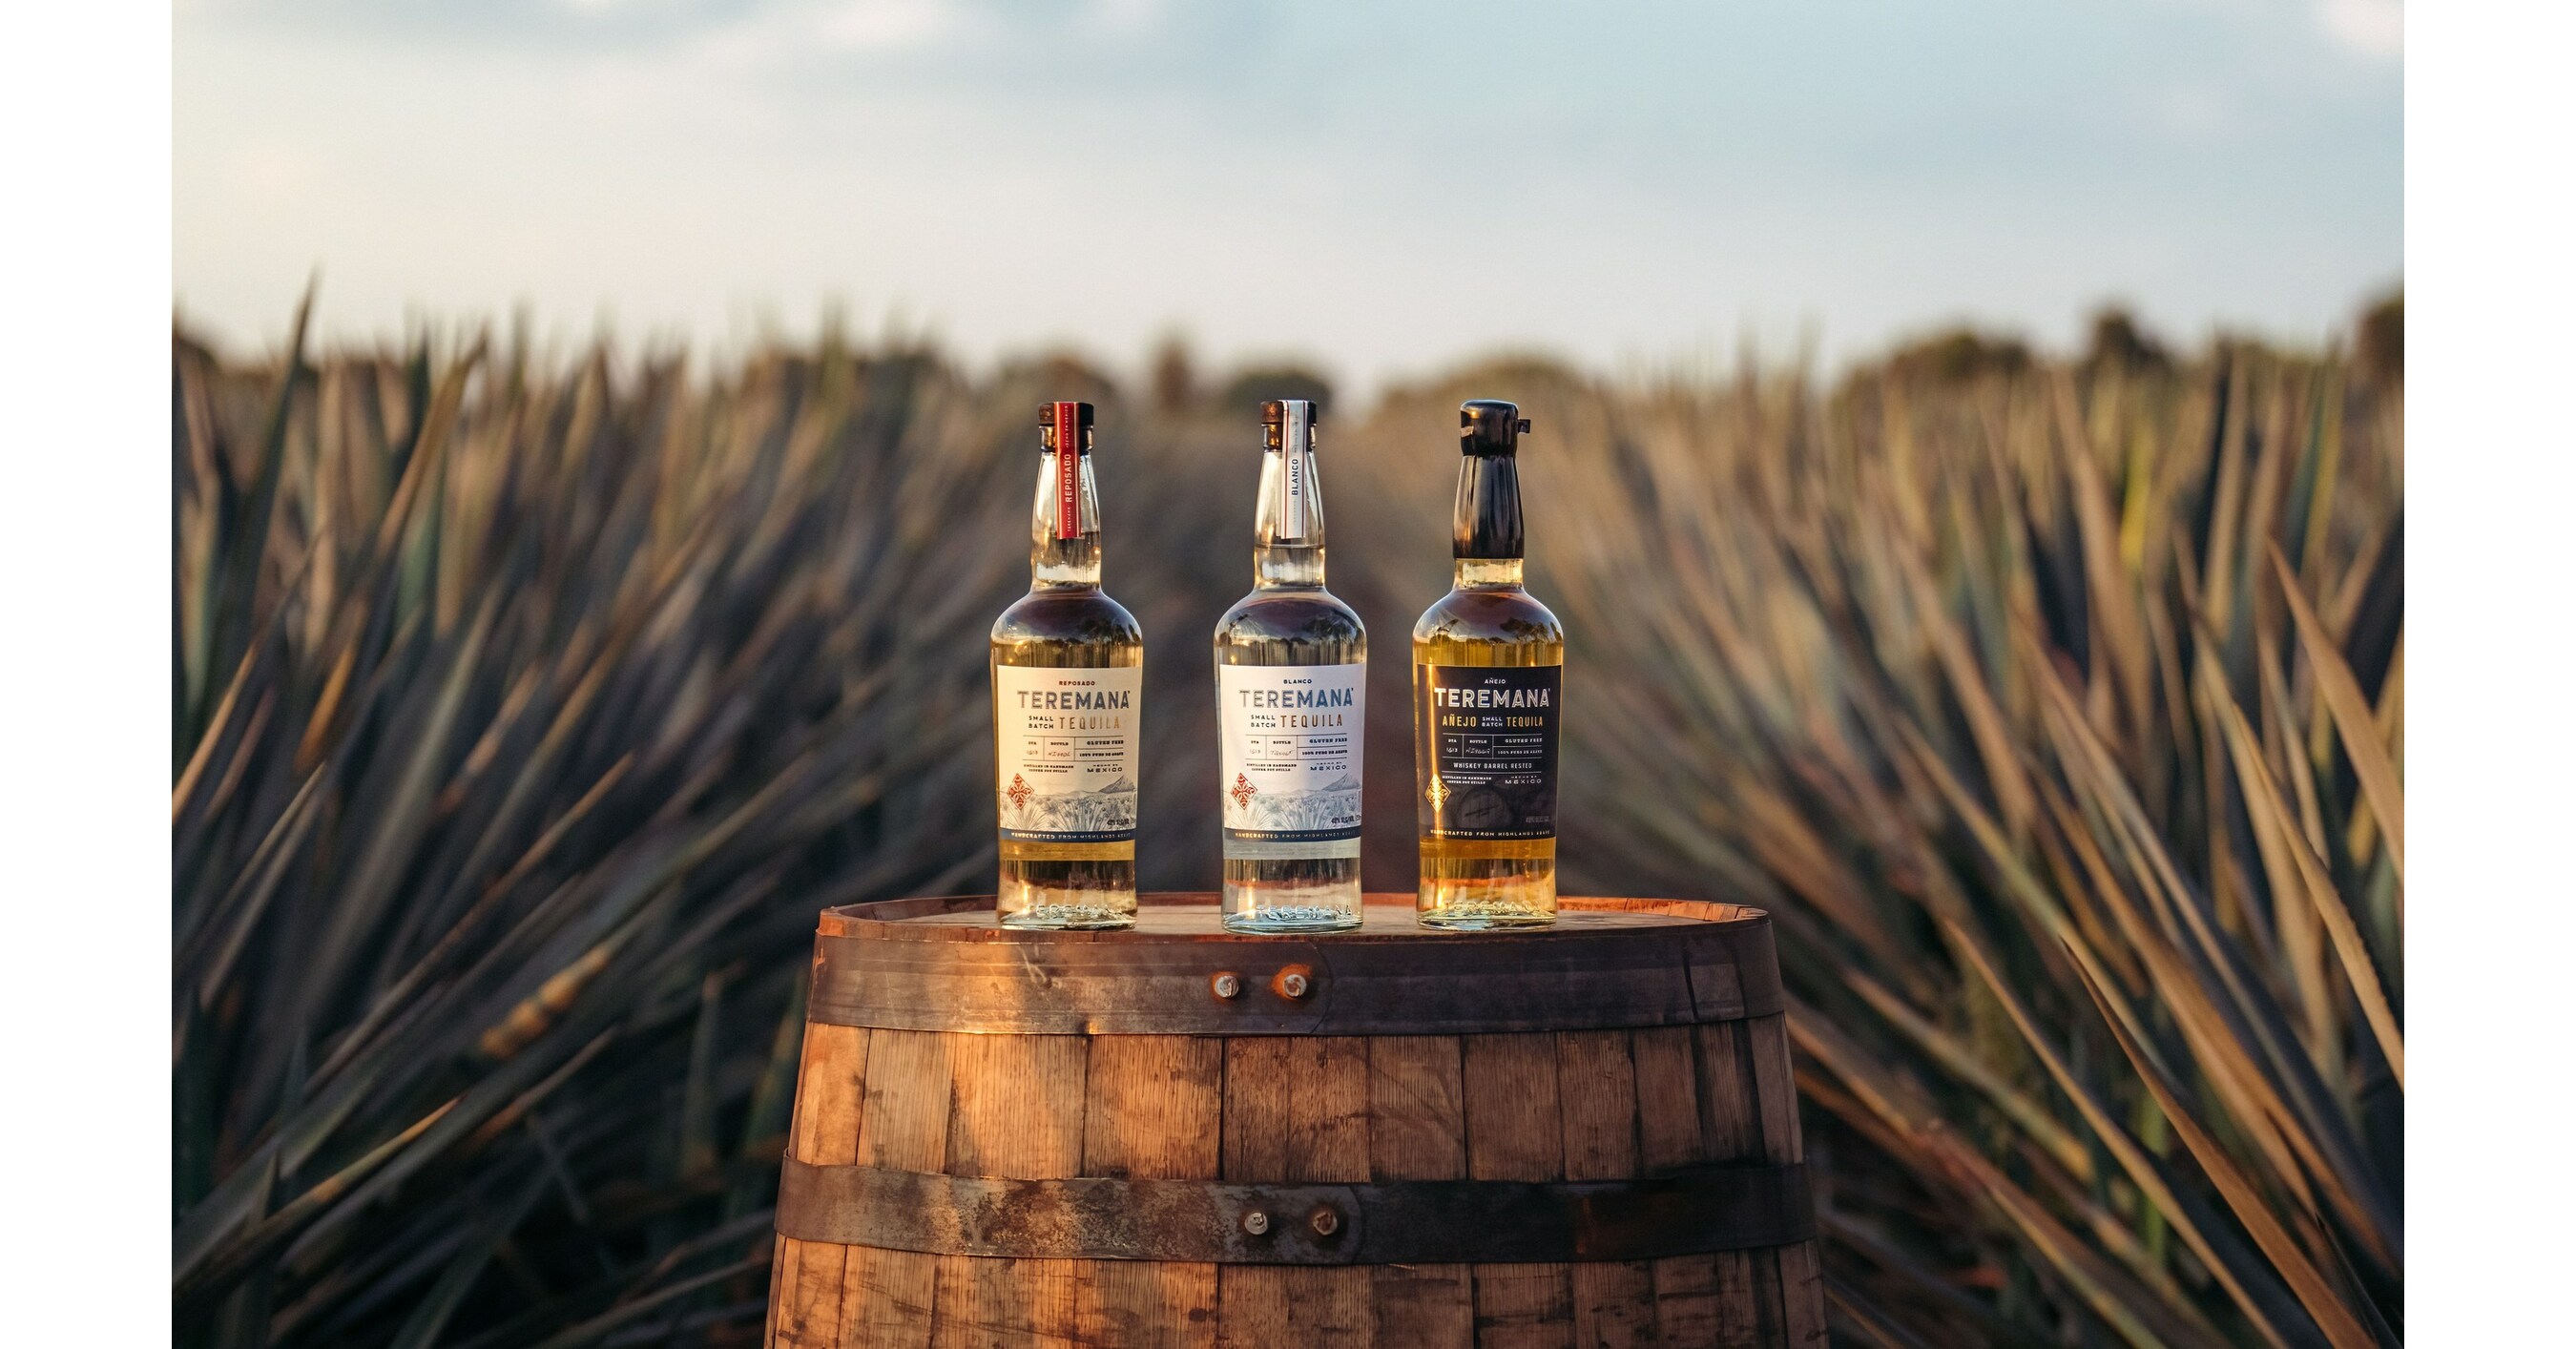 TEREMANA TEQUILA EXPANDS GLOBAL FOOTPRINT WITH MAJOR INTERNATIONAL EXPANSION